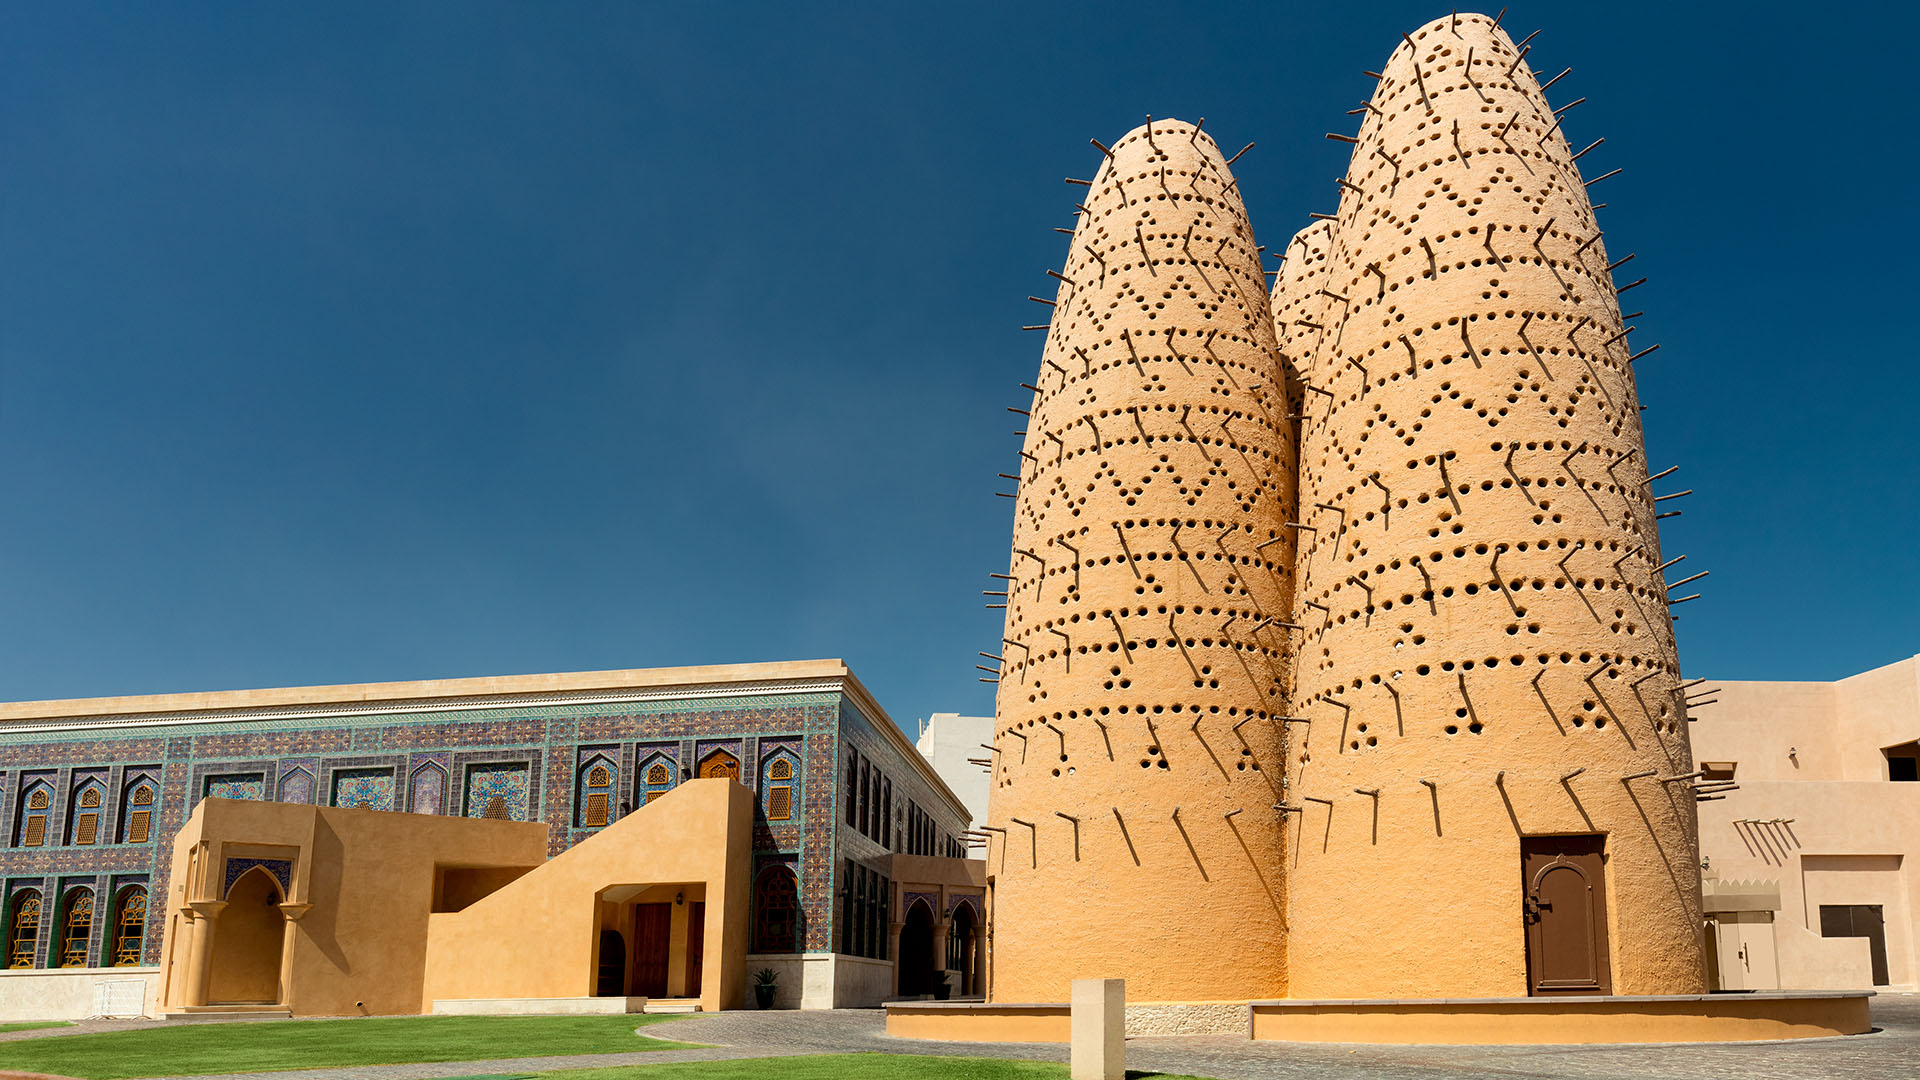 From Ancient Treasures to Eye-Popping Architecture, Qatar’s Culture Scene Is Showstopping